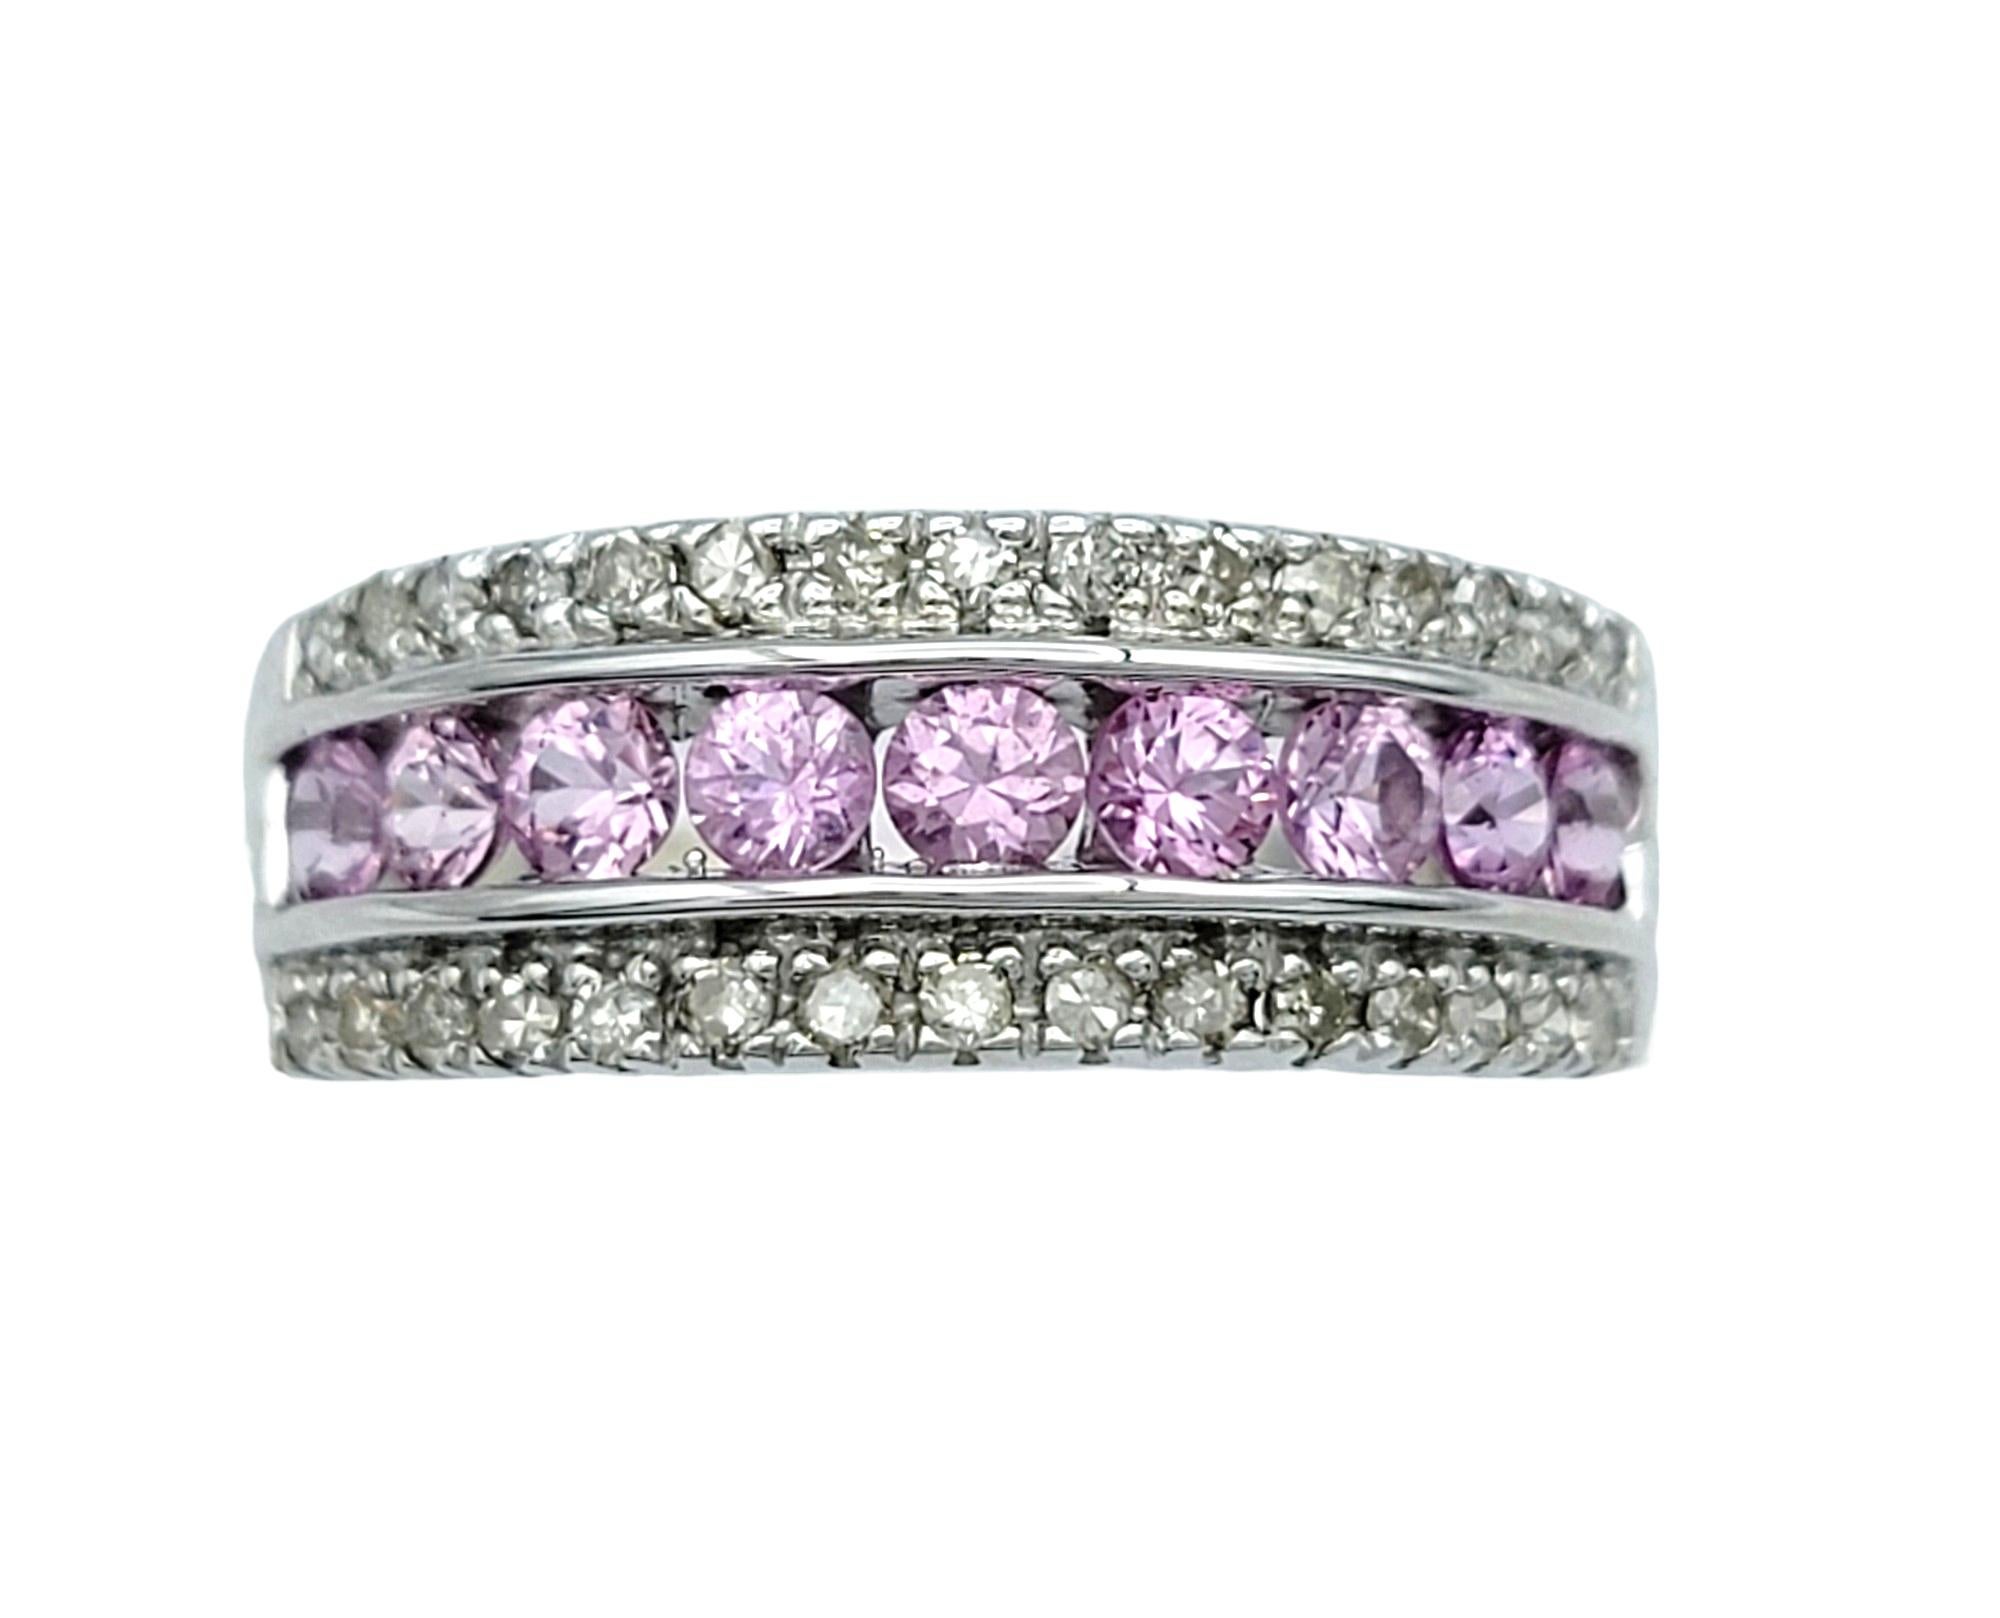 Ring Size: 7

This elegant pink sapphire and diamond band ring is a beautful work of art. Set in lustrous 14 karat white gold, the band features alternating pink sapphires and dazzling diamonds, creating a captivating display of color and